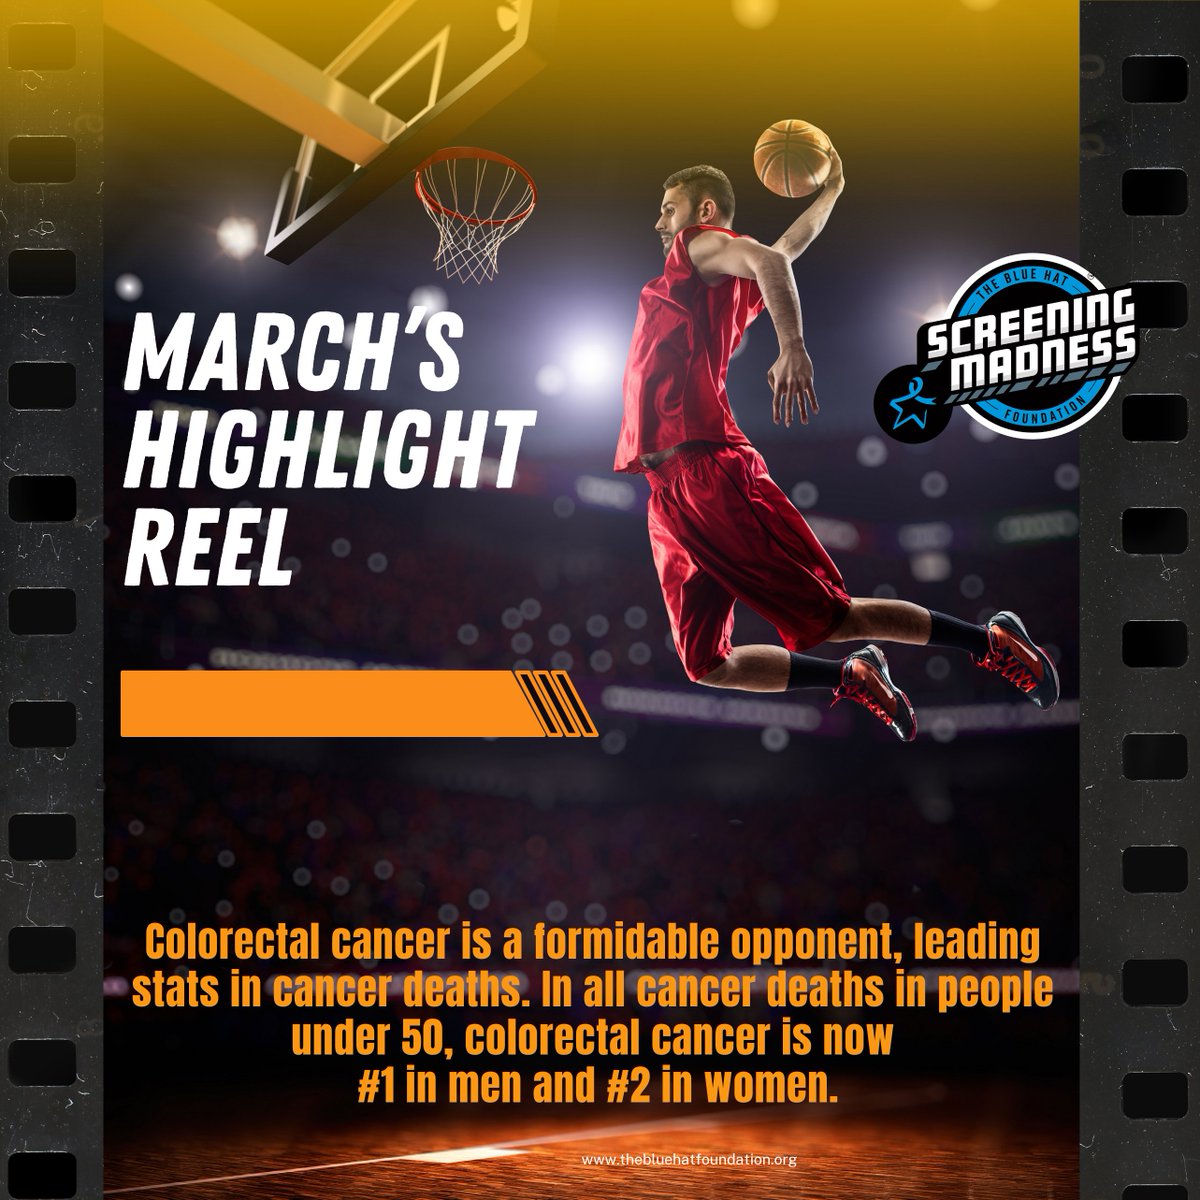 From buzzer-beaters in the Men's First Four to the women's tip-off, #MarchMadness is here! Let's use this excitement to highlight that #colorectalcancer screening starts at age 45. Every screening is a win against cancer! #ScreeningMadness #GetScreened @BigTenCRC @colon_survivor